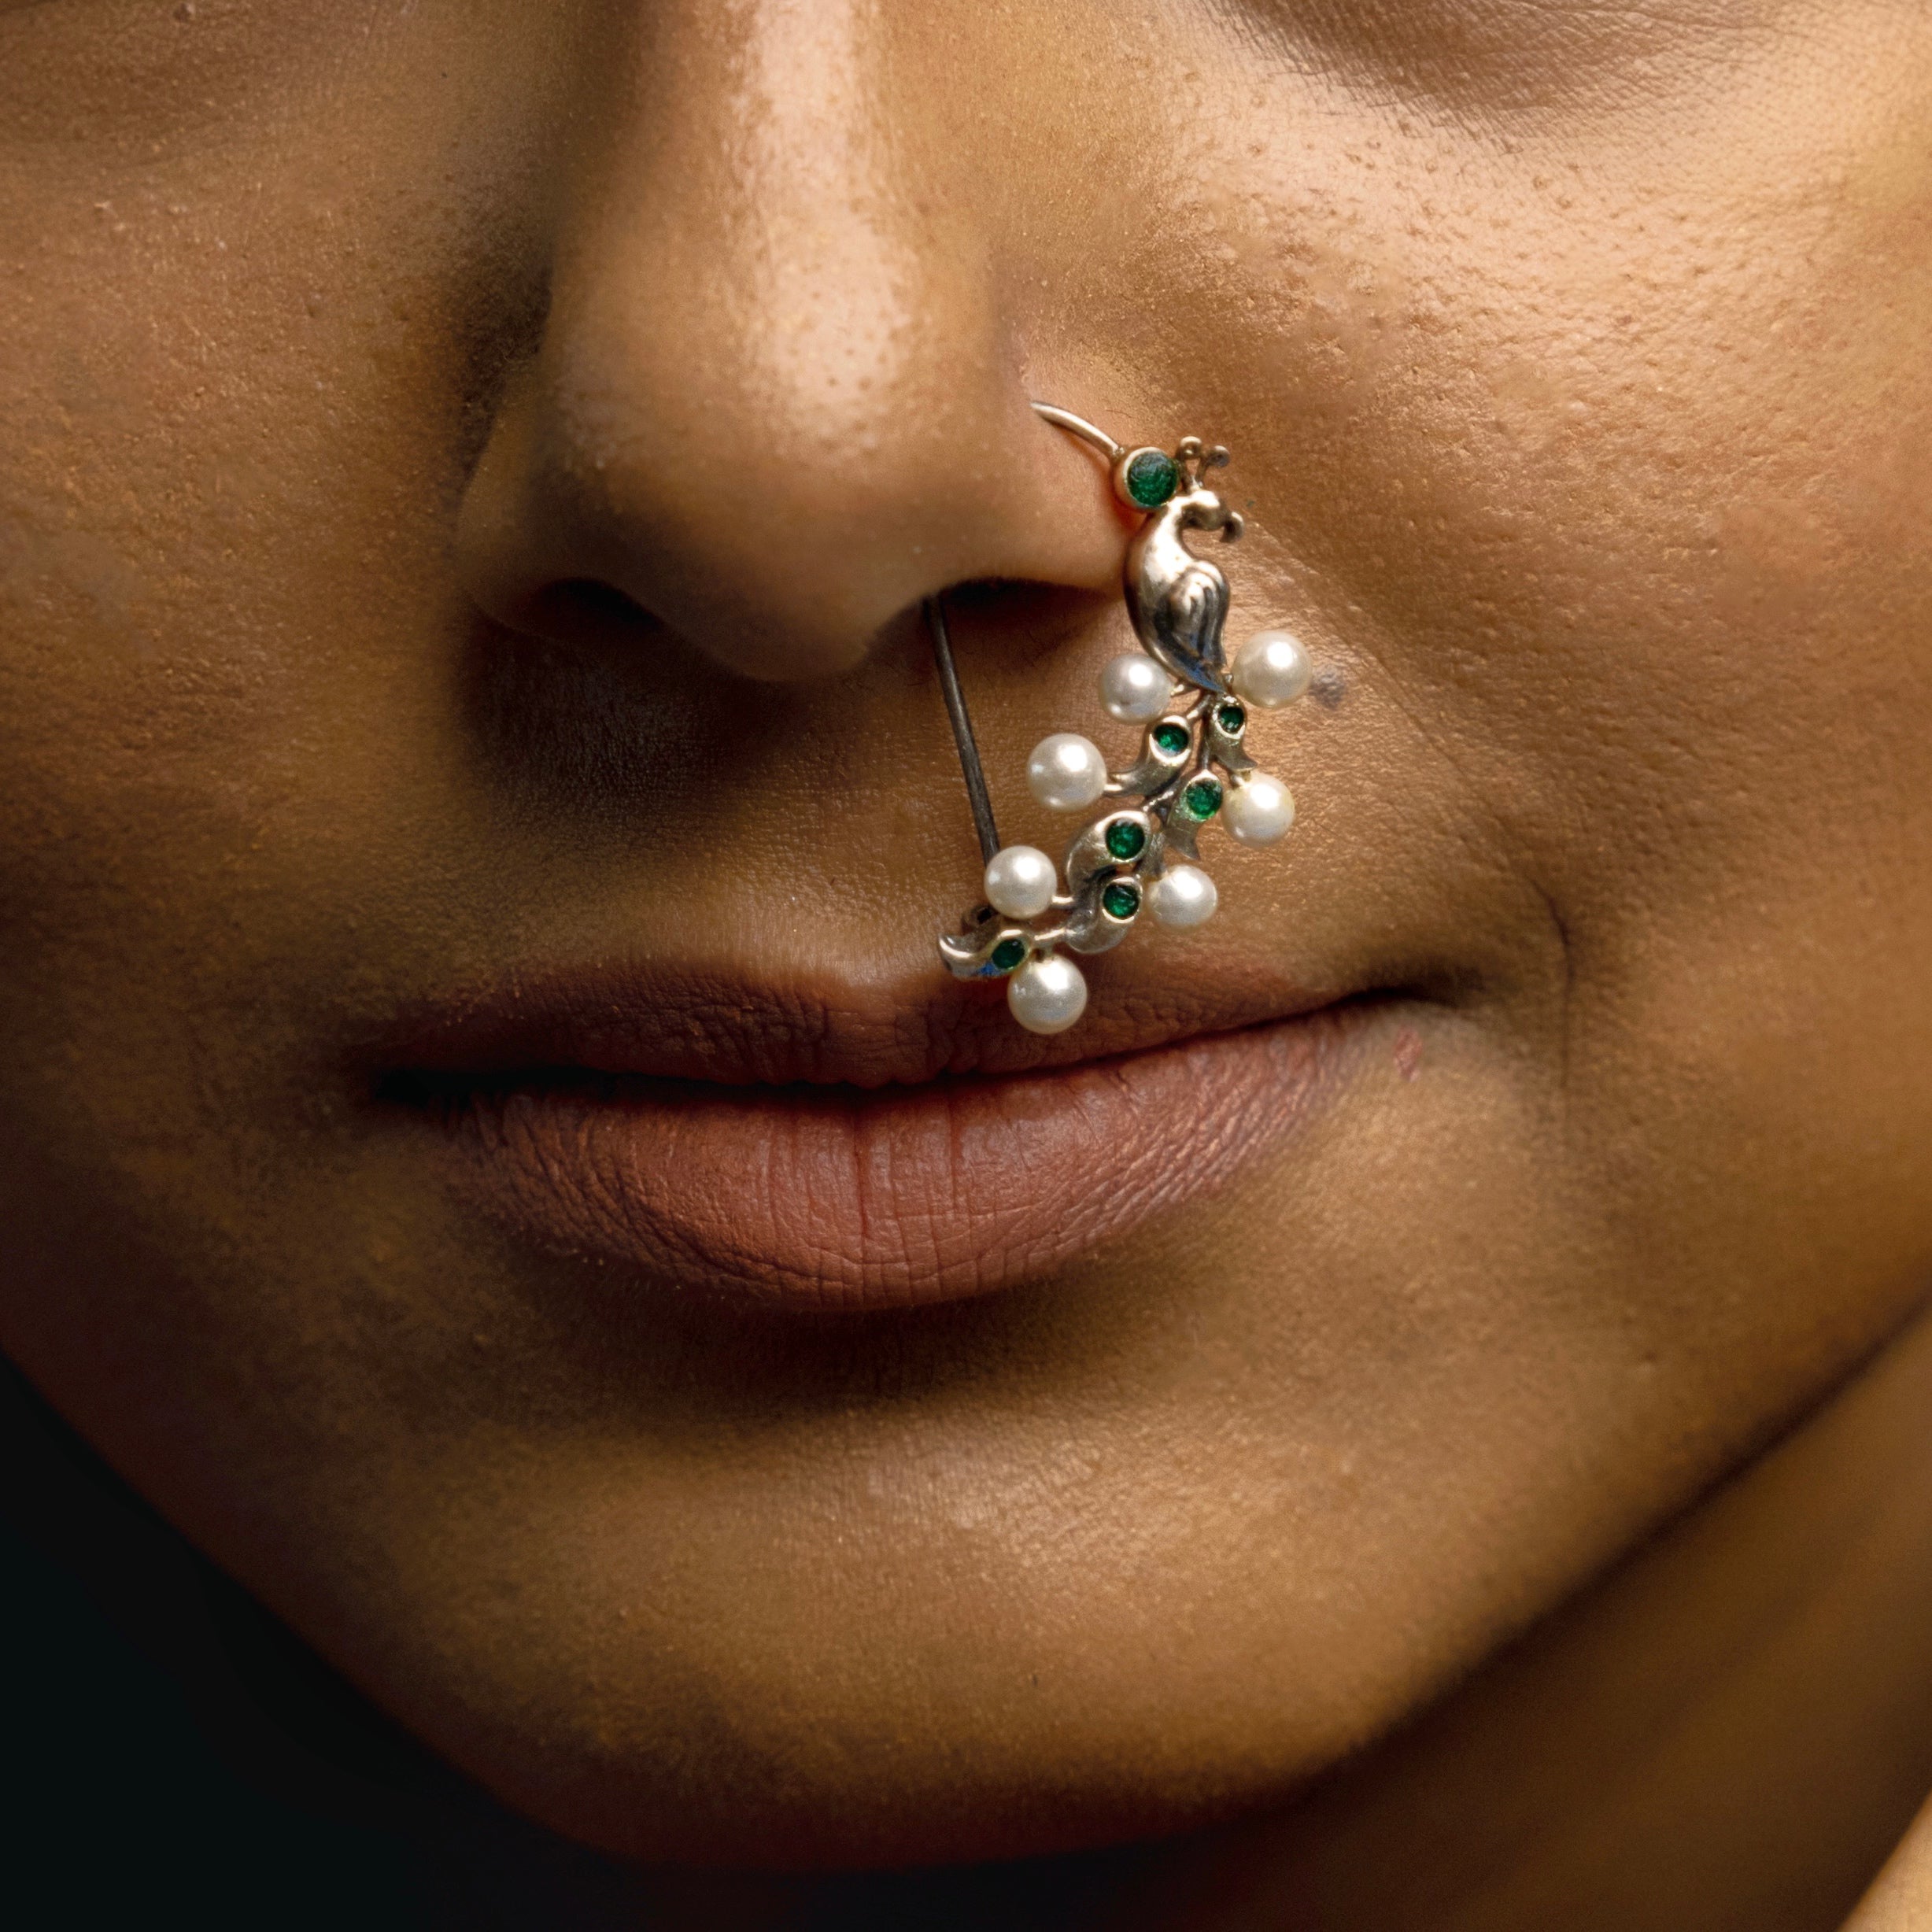 Pearl Peacock Silver Nath/ Nose Ring By Moha - Pierced Left